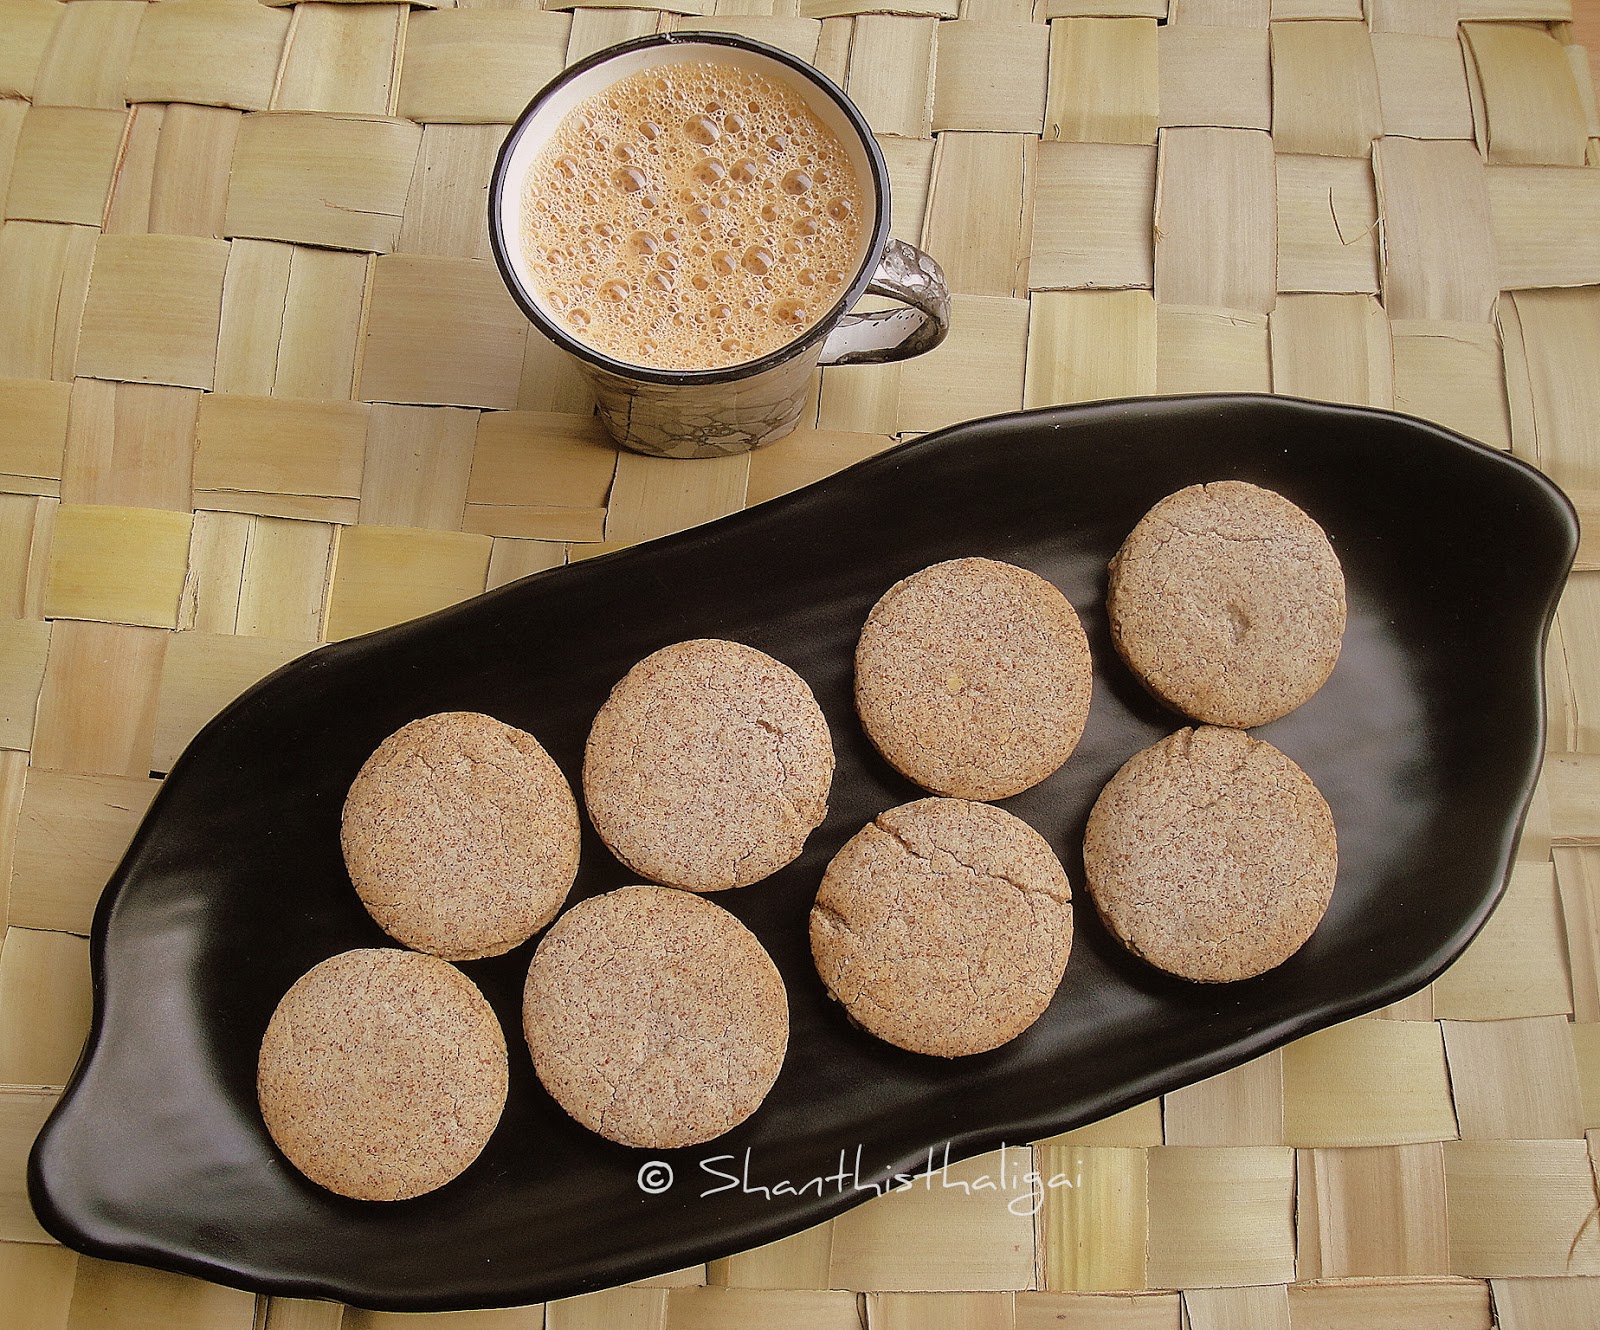 ragi-biscuits-with-airfryer,ragi-biscuits-with-airfryer-recipe